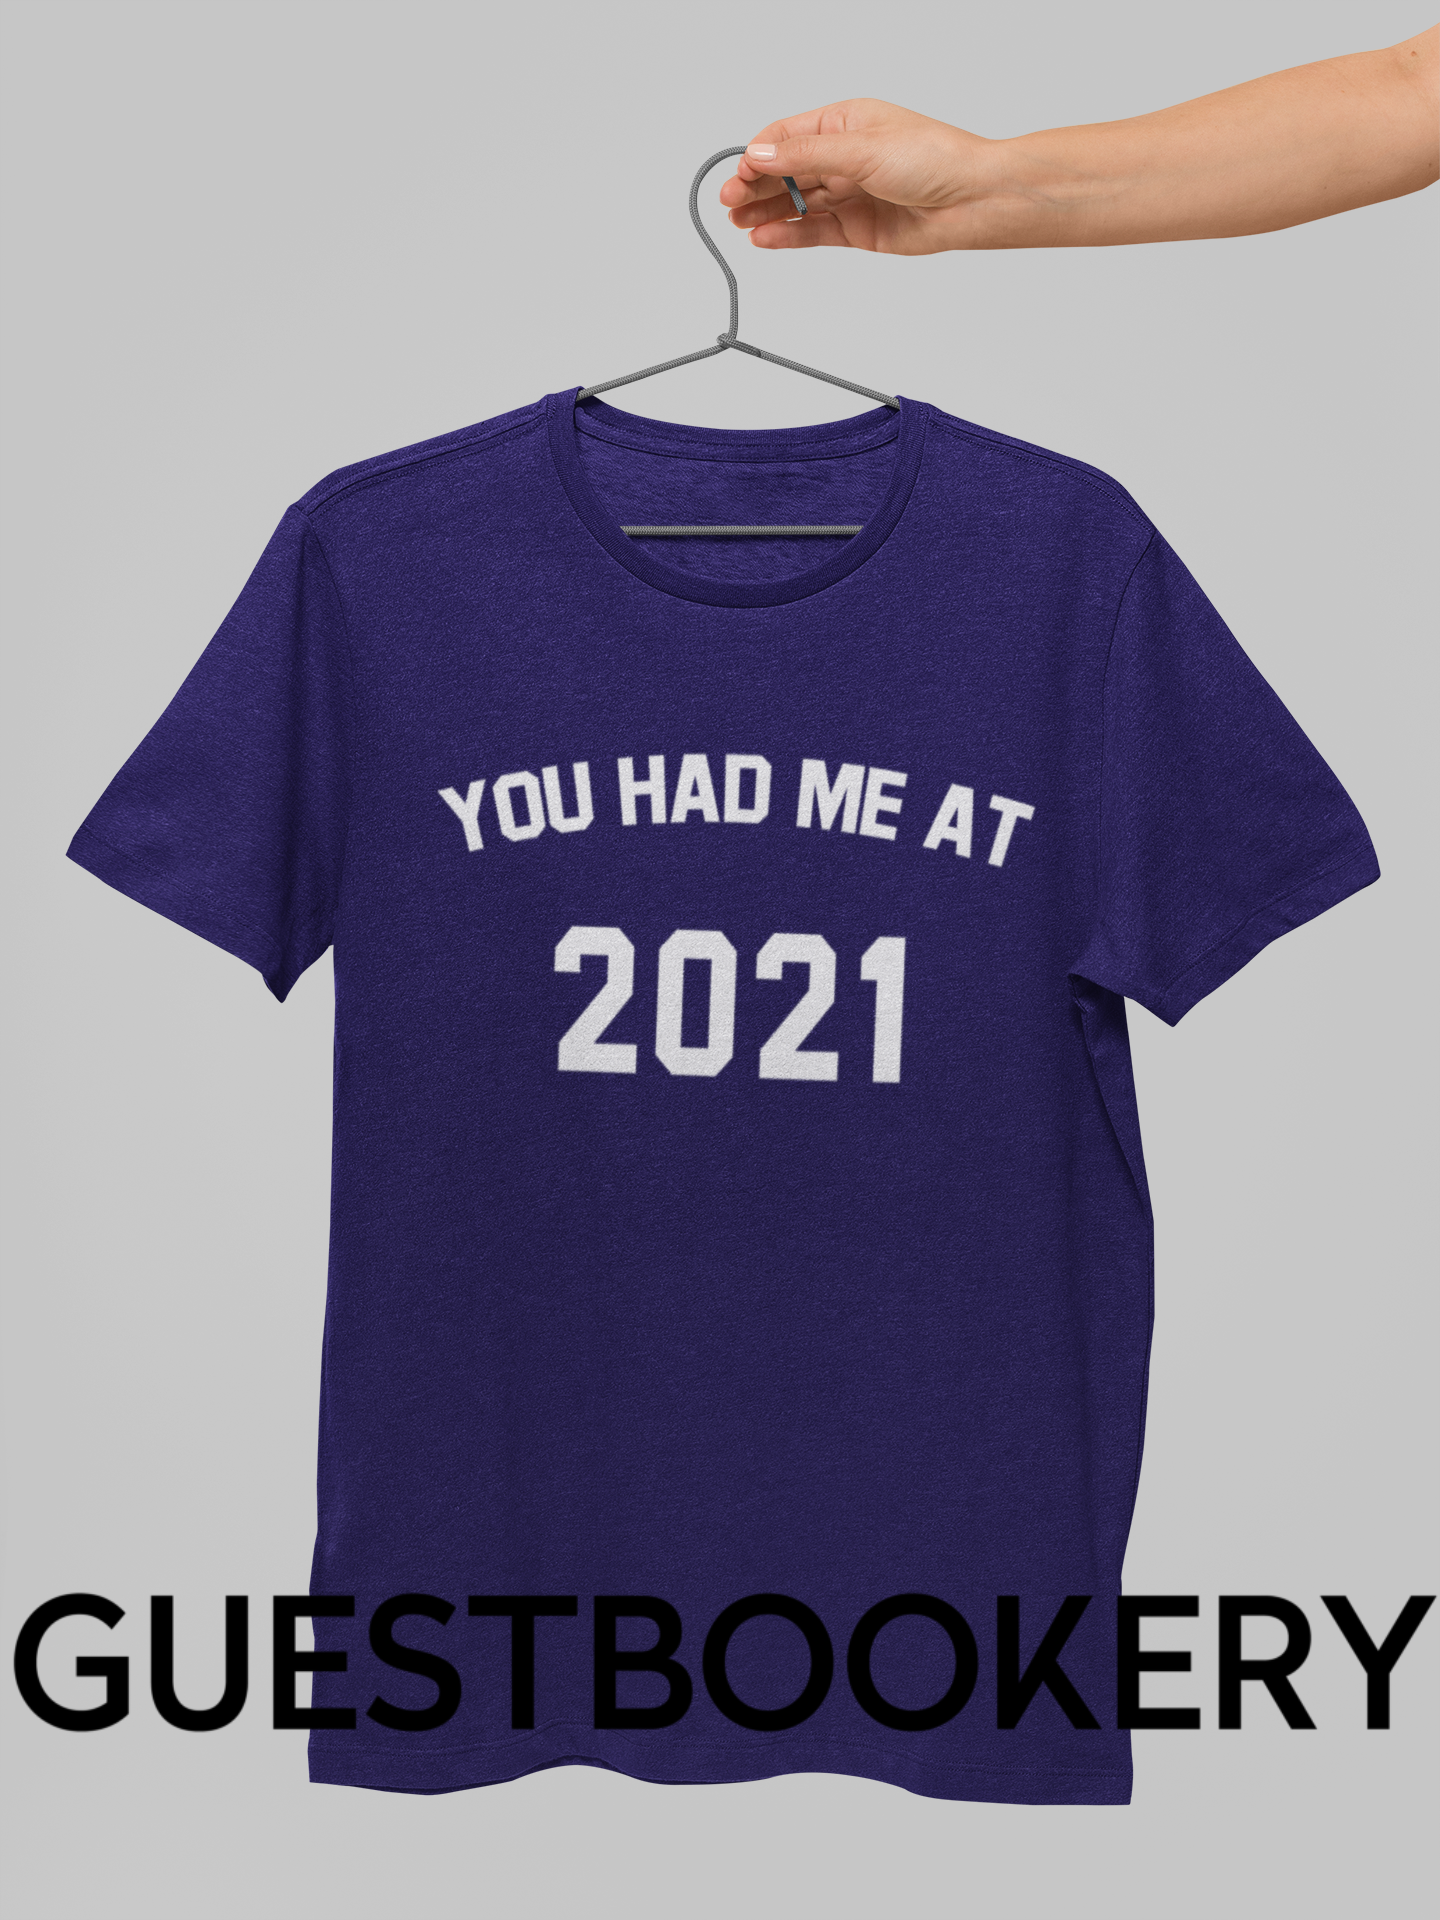 You Had Me At 2021 T-Shirt - Guestbookery